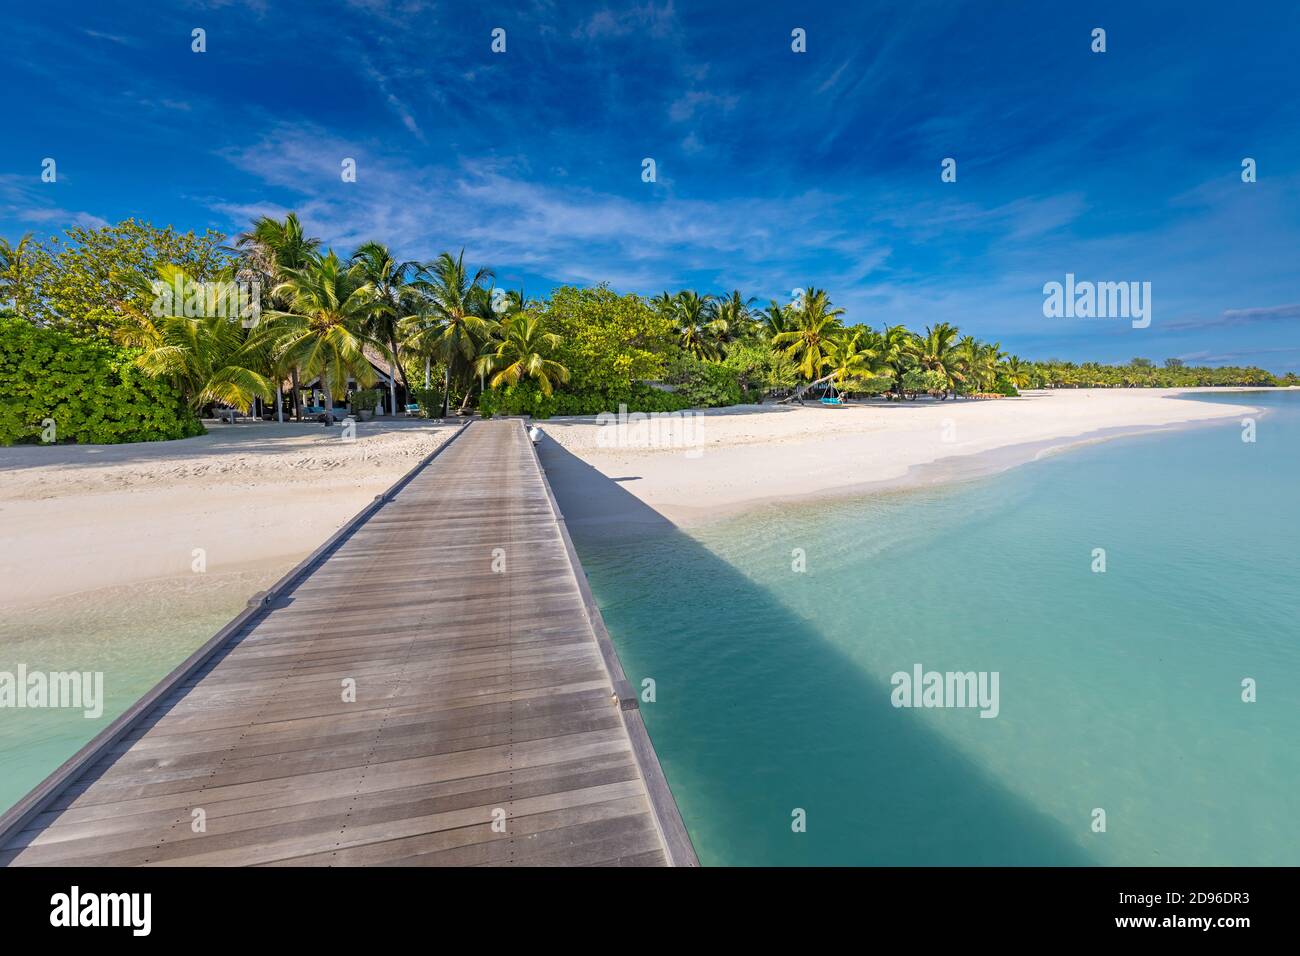 Beautiful beach in Maldives. Long jetty vacations and tourism concept. Tropical resort beach landscape, paradise island, travel concept Stock Photo